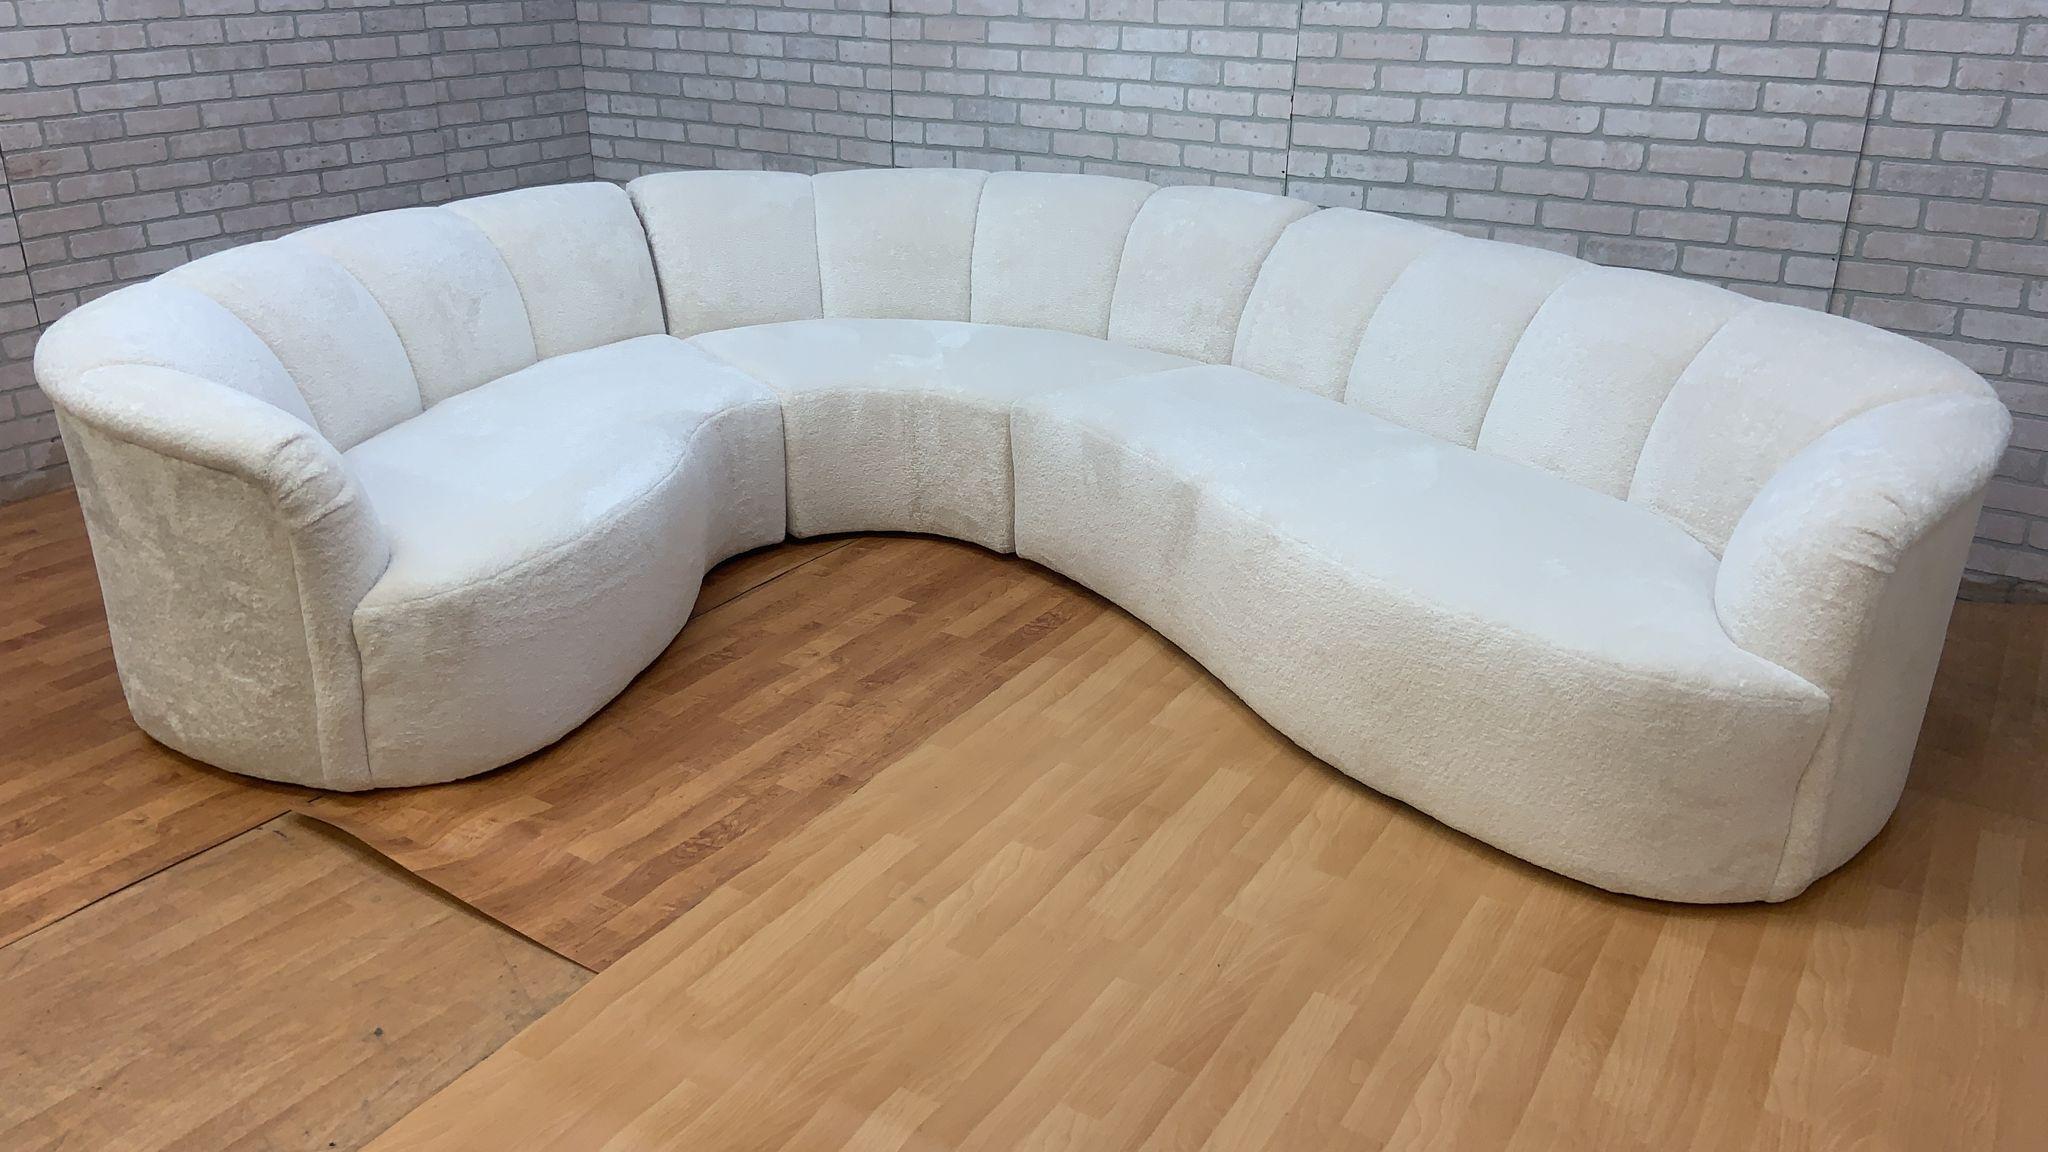 American Curved Channel Back Serpentine Sectional Sofa Newly Upholstered in Alpaca Wool